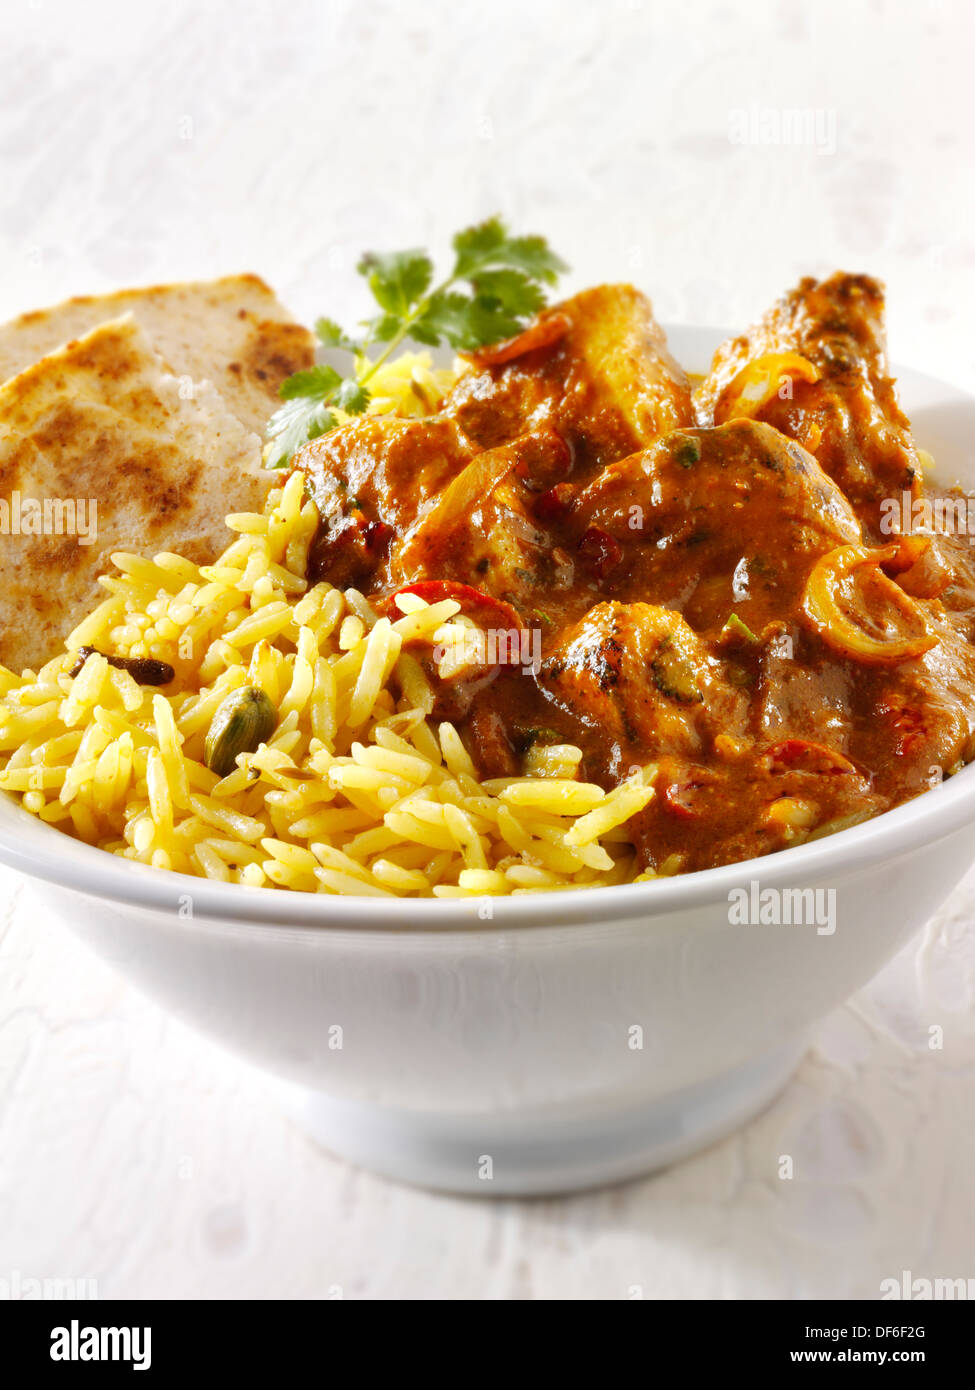 Huhn Madras, Pilau Reis & Popodoms. Indische traditionelle Curry. Stockfoto